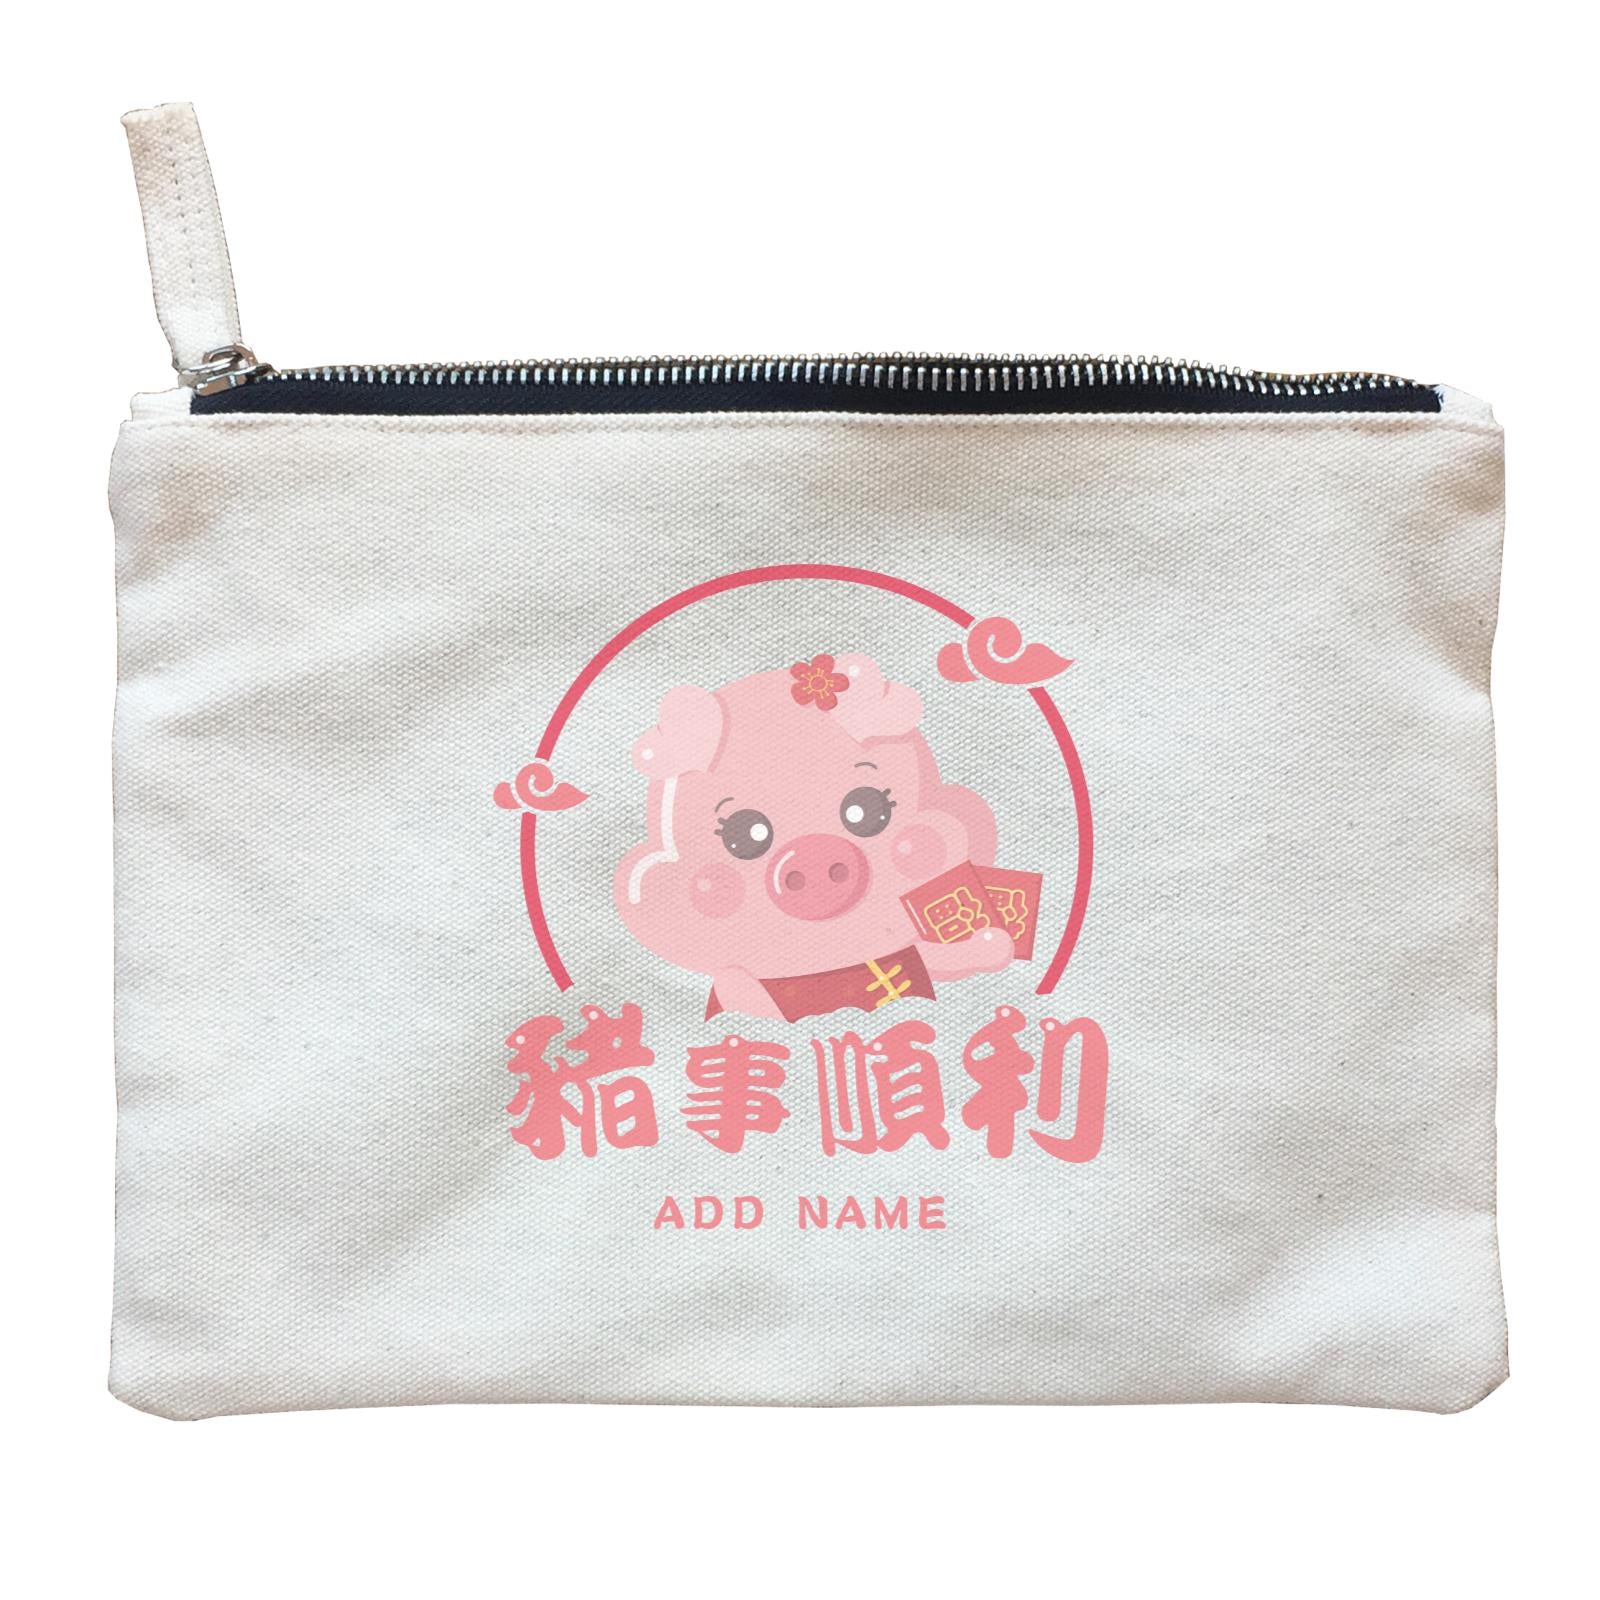 Chinese New Year Cute Pig Emblem Girl Accessories With Addname Zipper Pouch